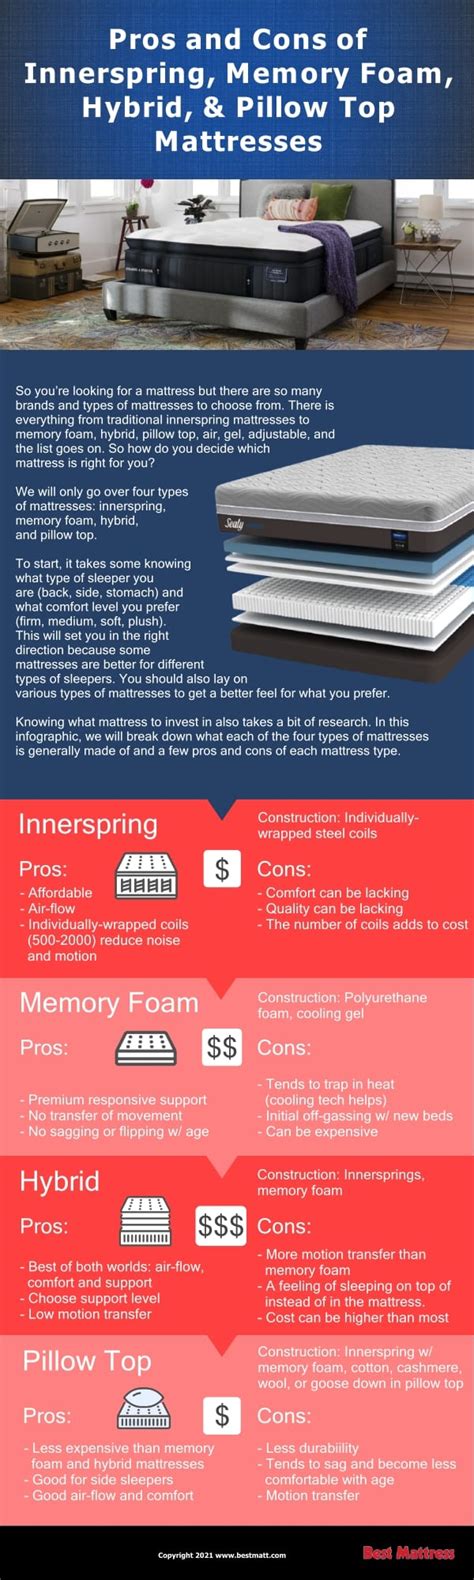 And now, these mattresses command an impressive 46.87% market share. Pros and Cons of Innerspring, Memory Foam, Hybrid ...